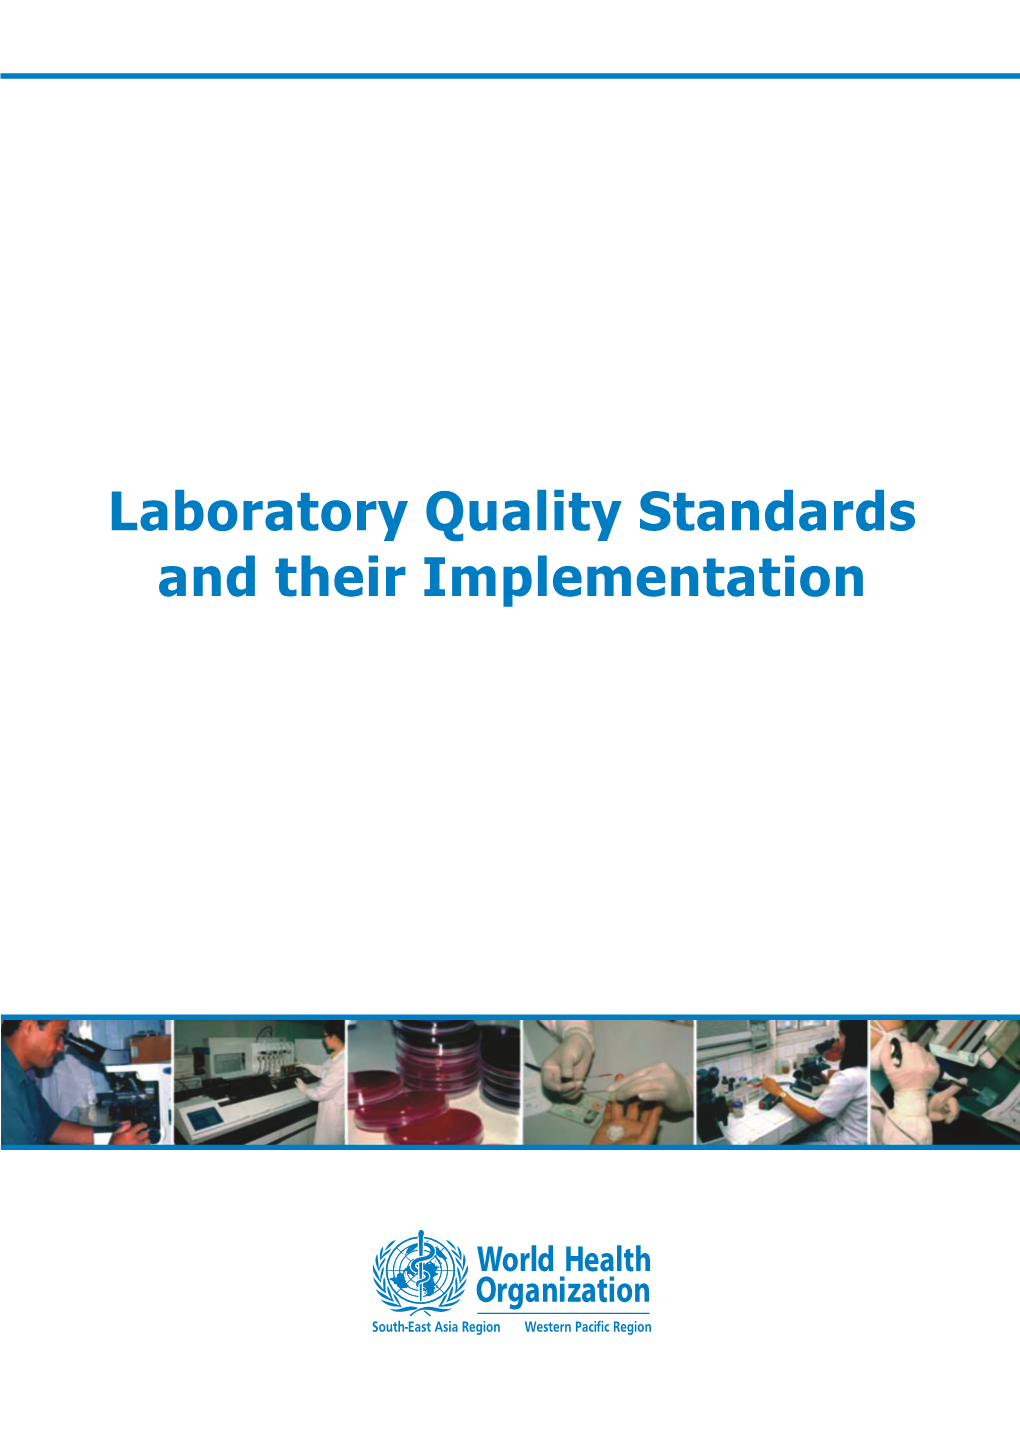 Laboratory Quality Standards and Their Implementation WHO Library Cataloguing-In-Publication Data